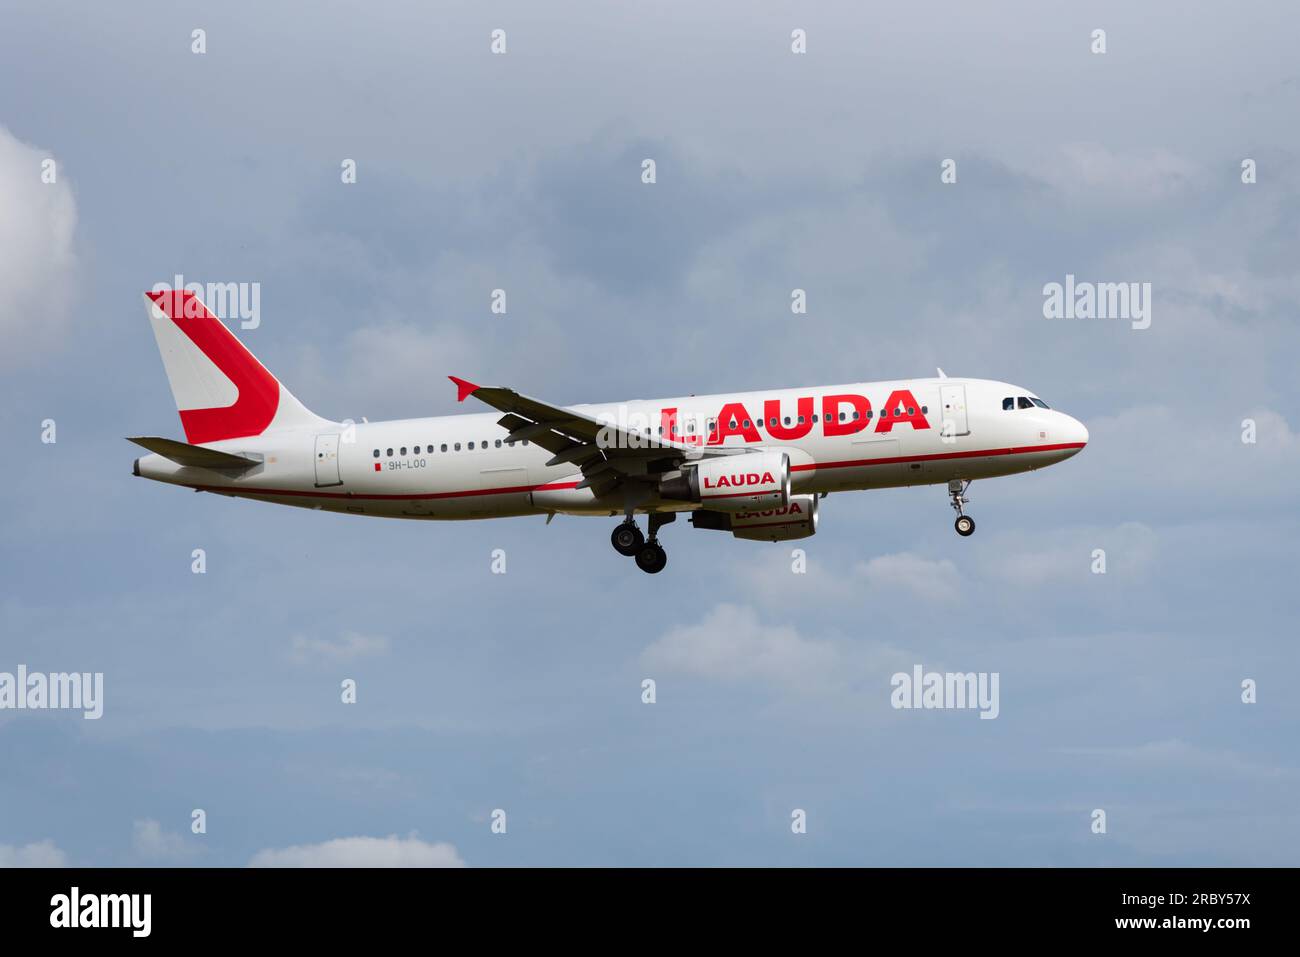 Lauda Europe Airbus A320 airliner jet plane on finals to land at London Stansted Airport, Essex, UK. Subsidiary of Ryanair Holdings Stock Photo